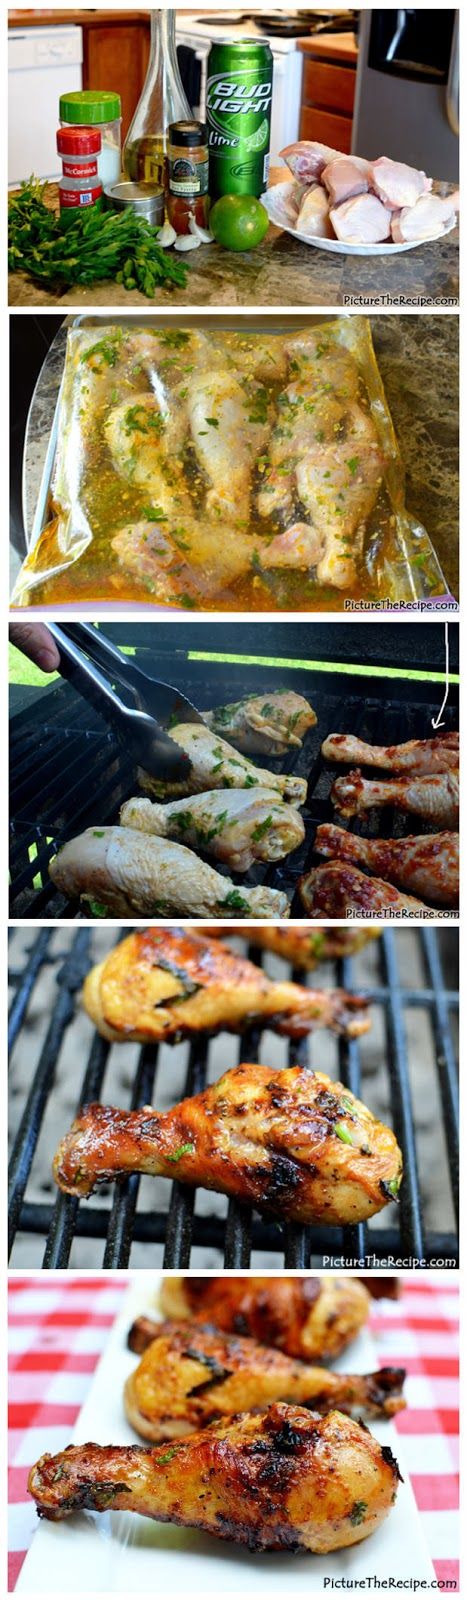 Grilled lime and beer chicken